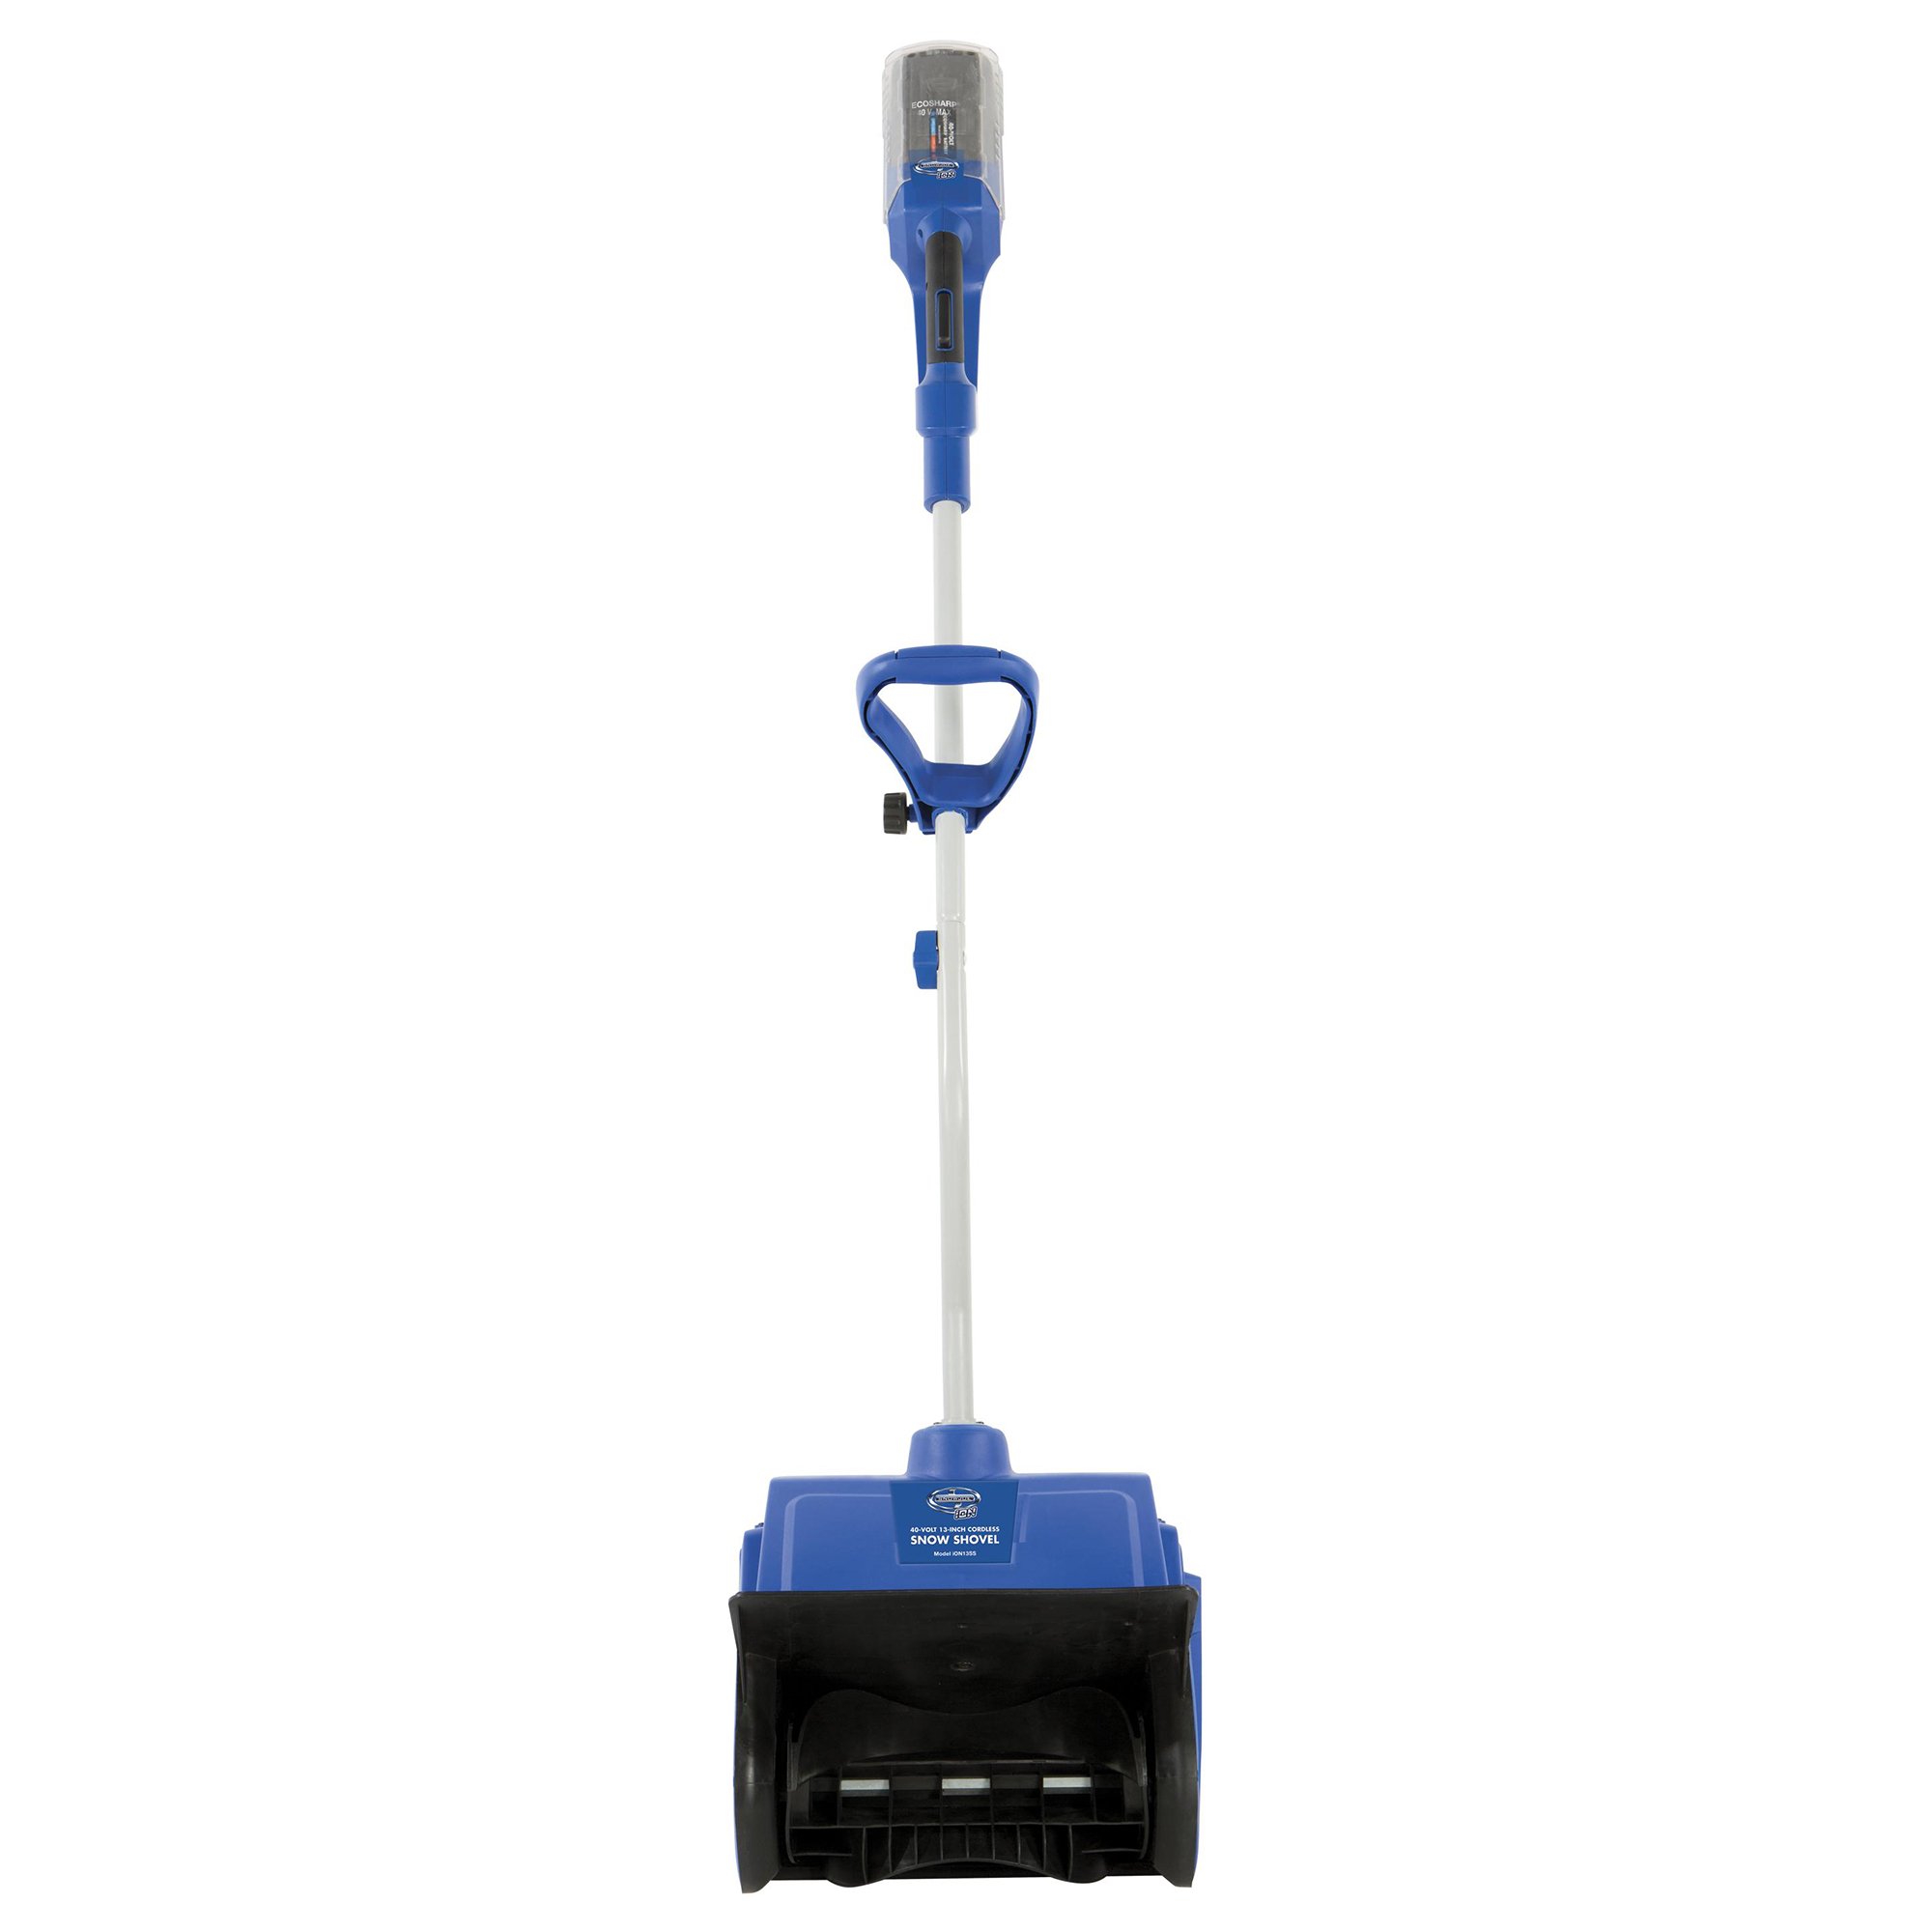 Snow Joe iON13SS 40-Volt iONMAX Cordless Brushless Snow Shovel Kit, 13-Inch, W/ 4.0-Ah Battery and Charger - image 3 of 8